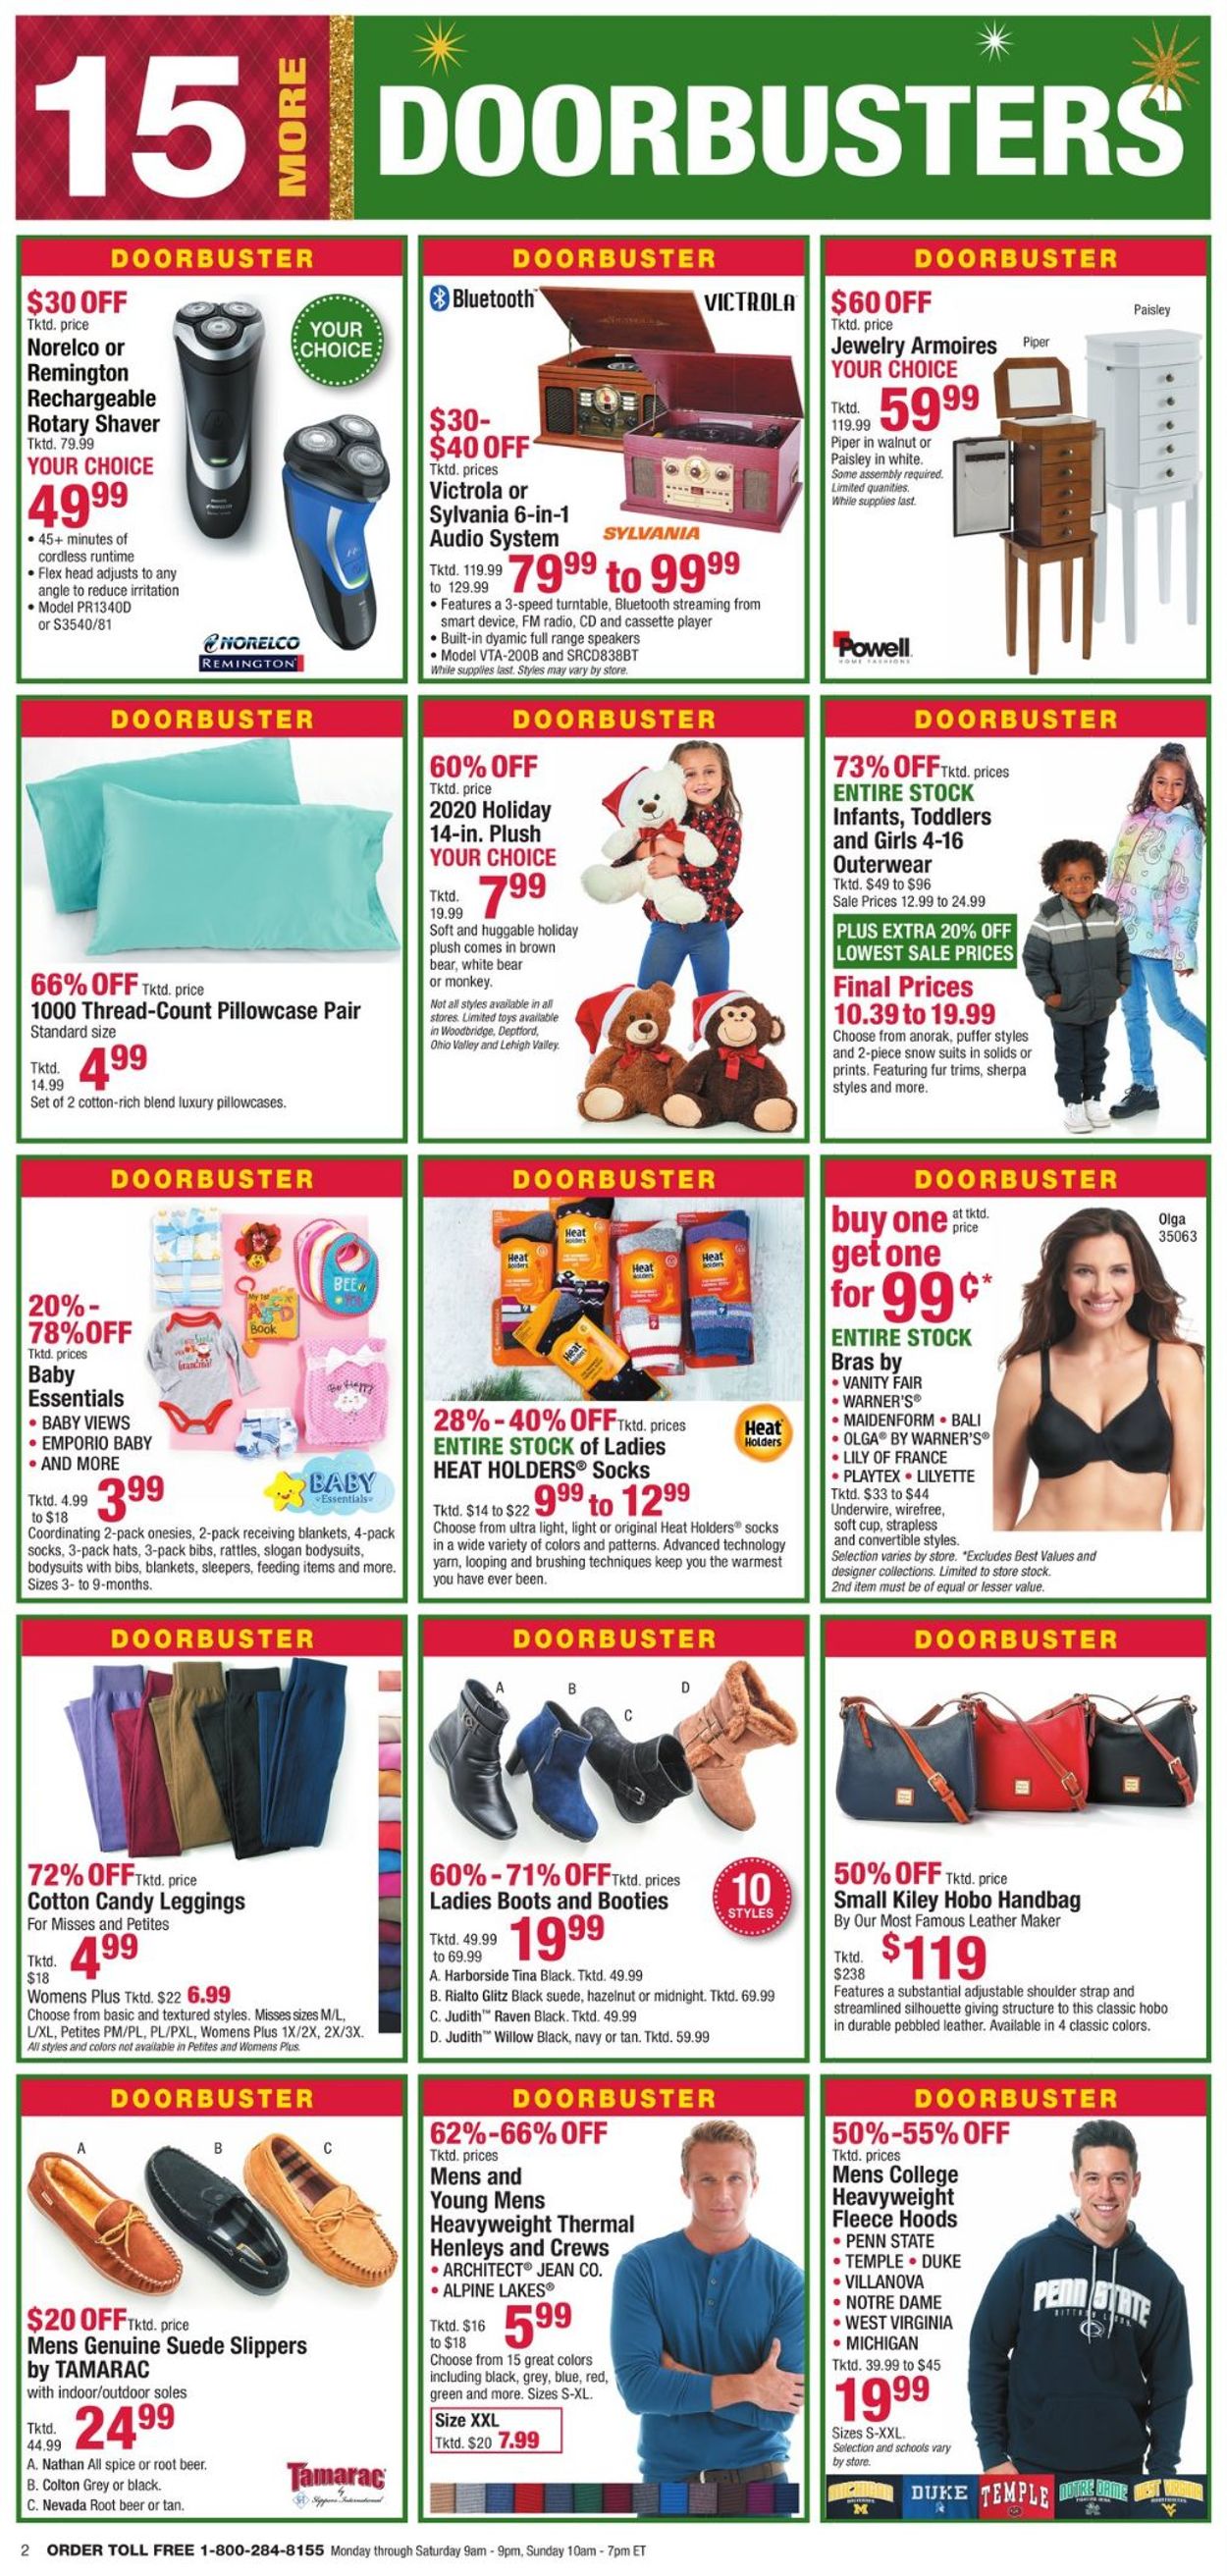 Boscov's 5 SHOPPING Days Left Weekly Ad Circular - valid 12/20-12/25/2020 (Page 2)